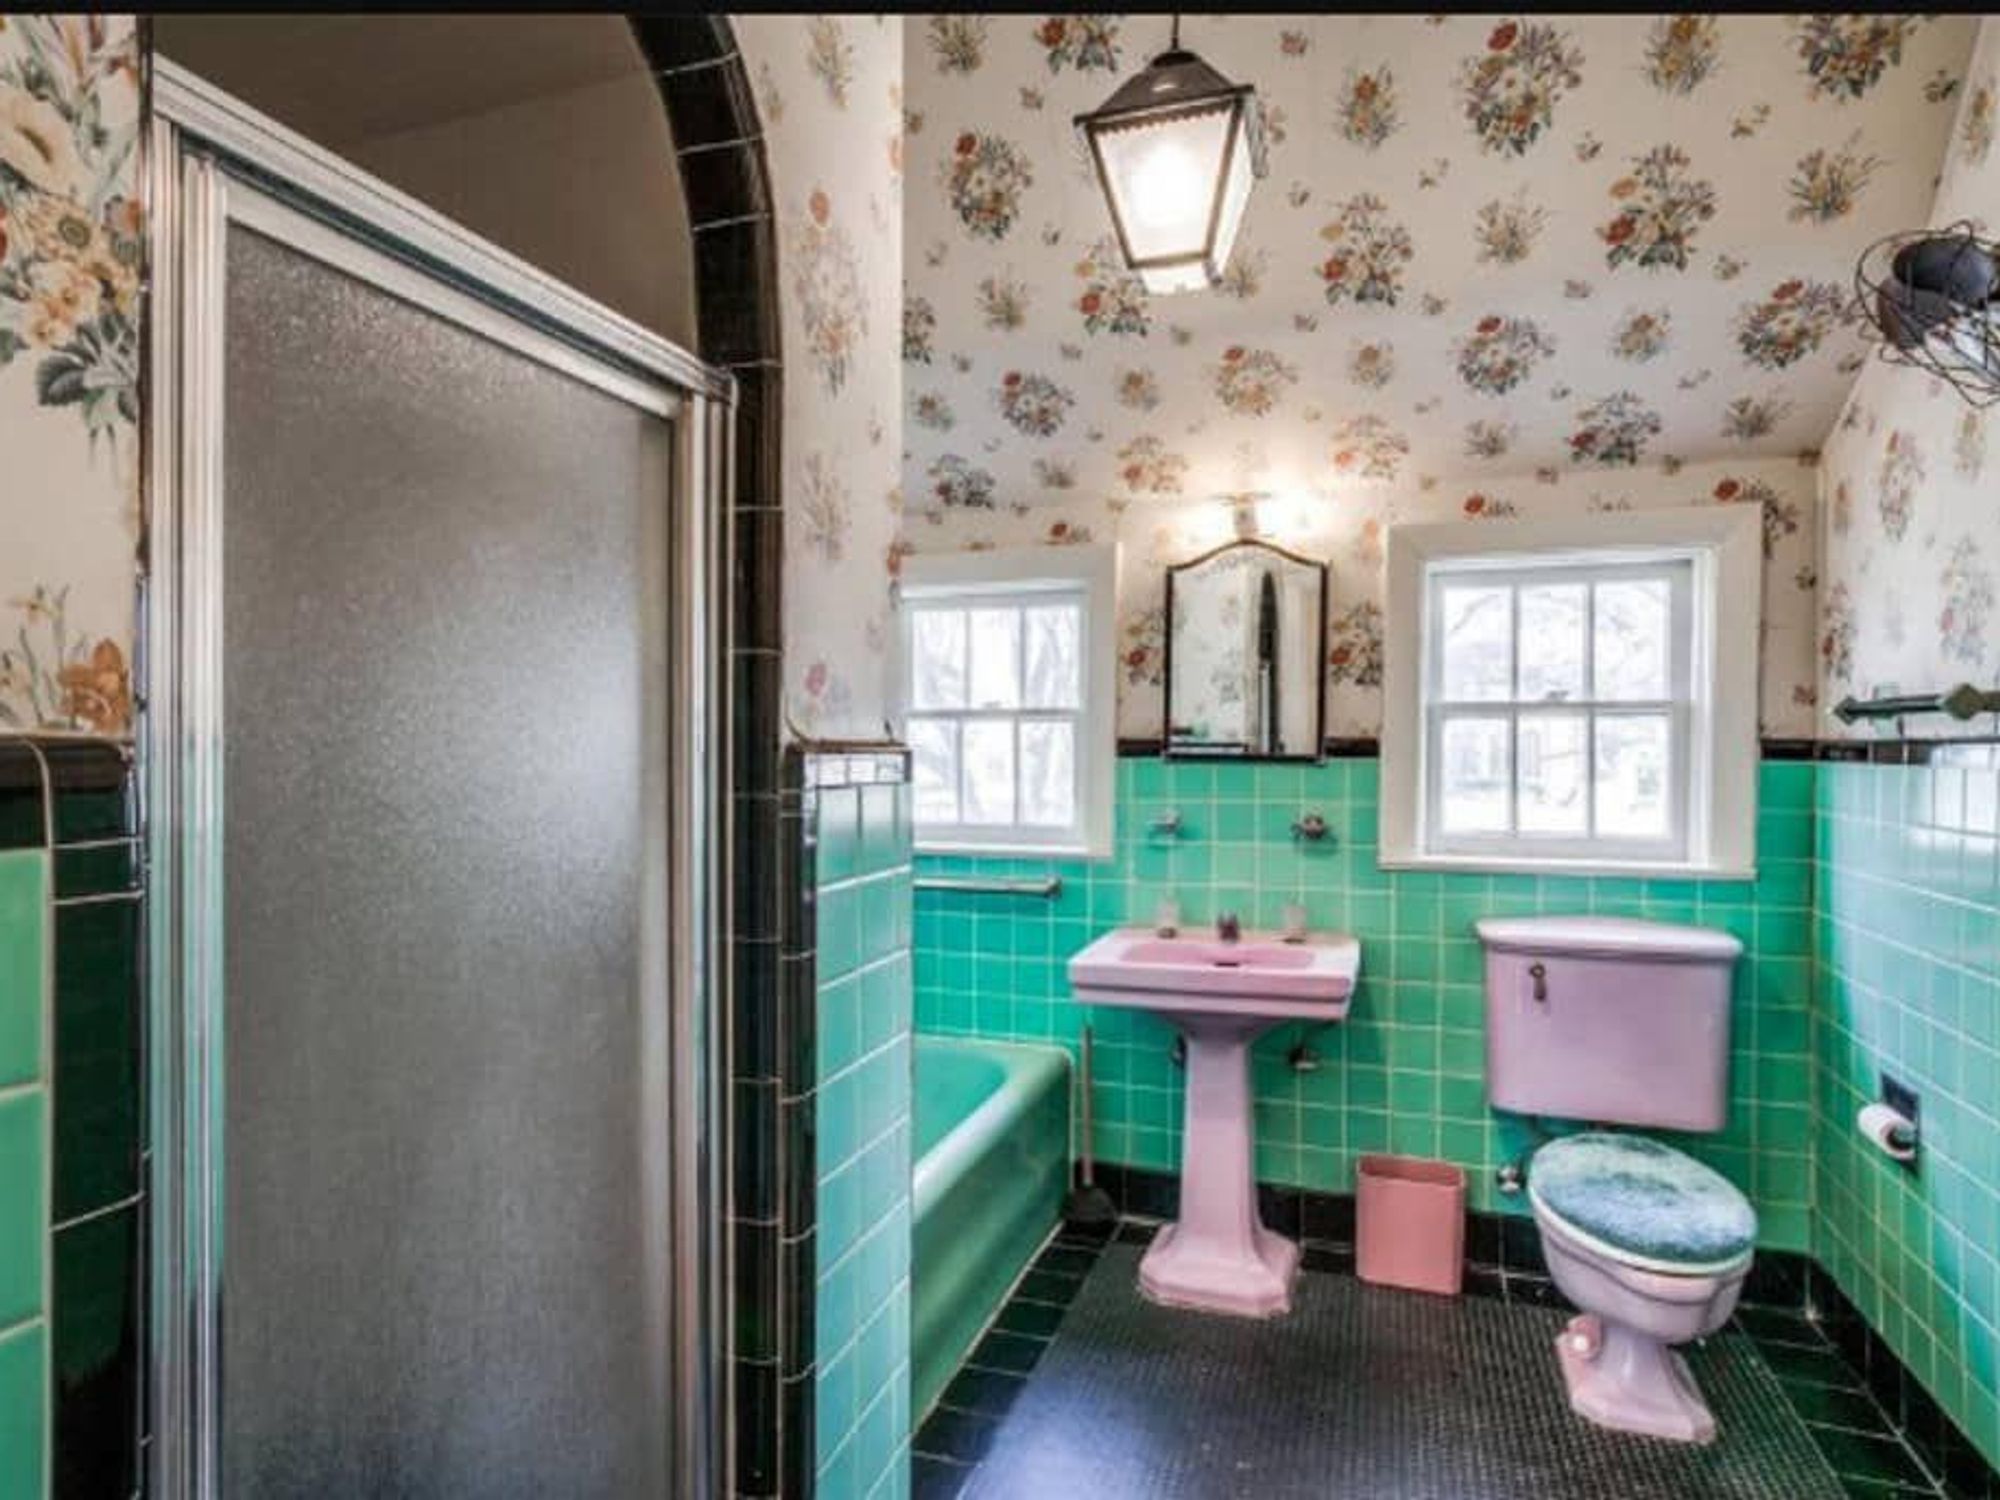 Green tile bathroom with glossy black trim comes with pink pedestal sink and commode.